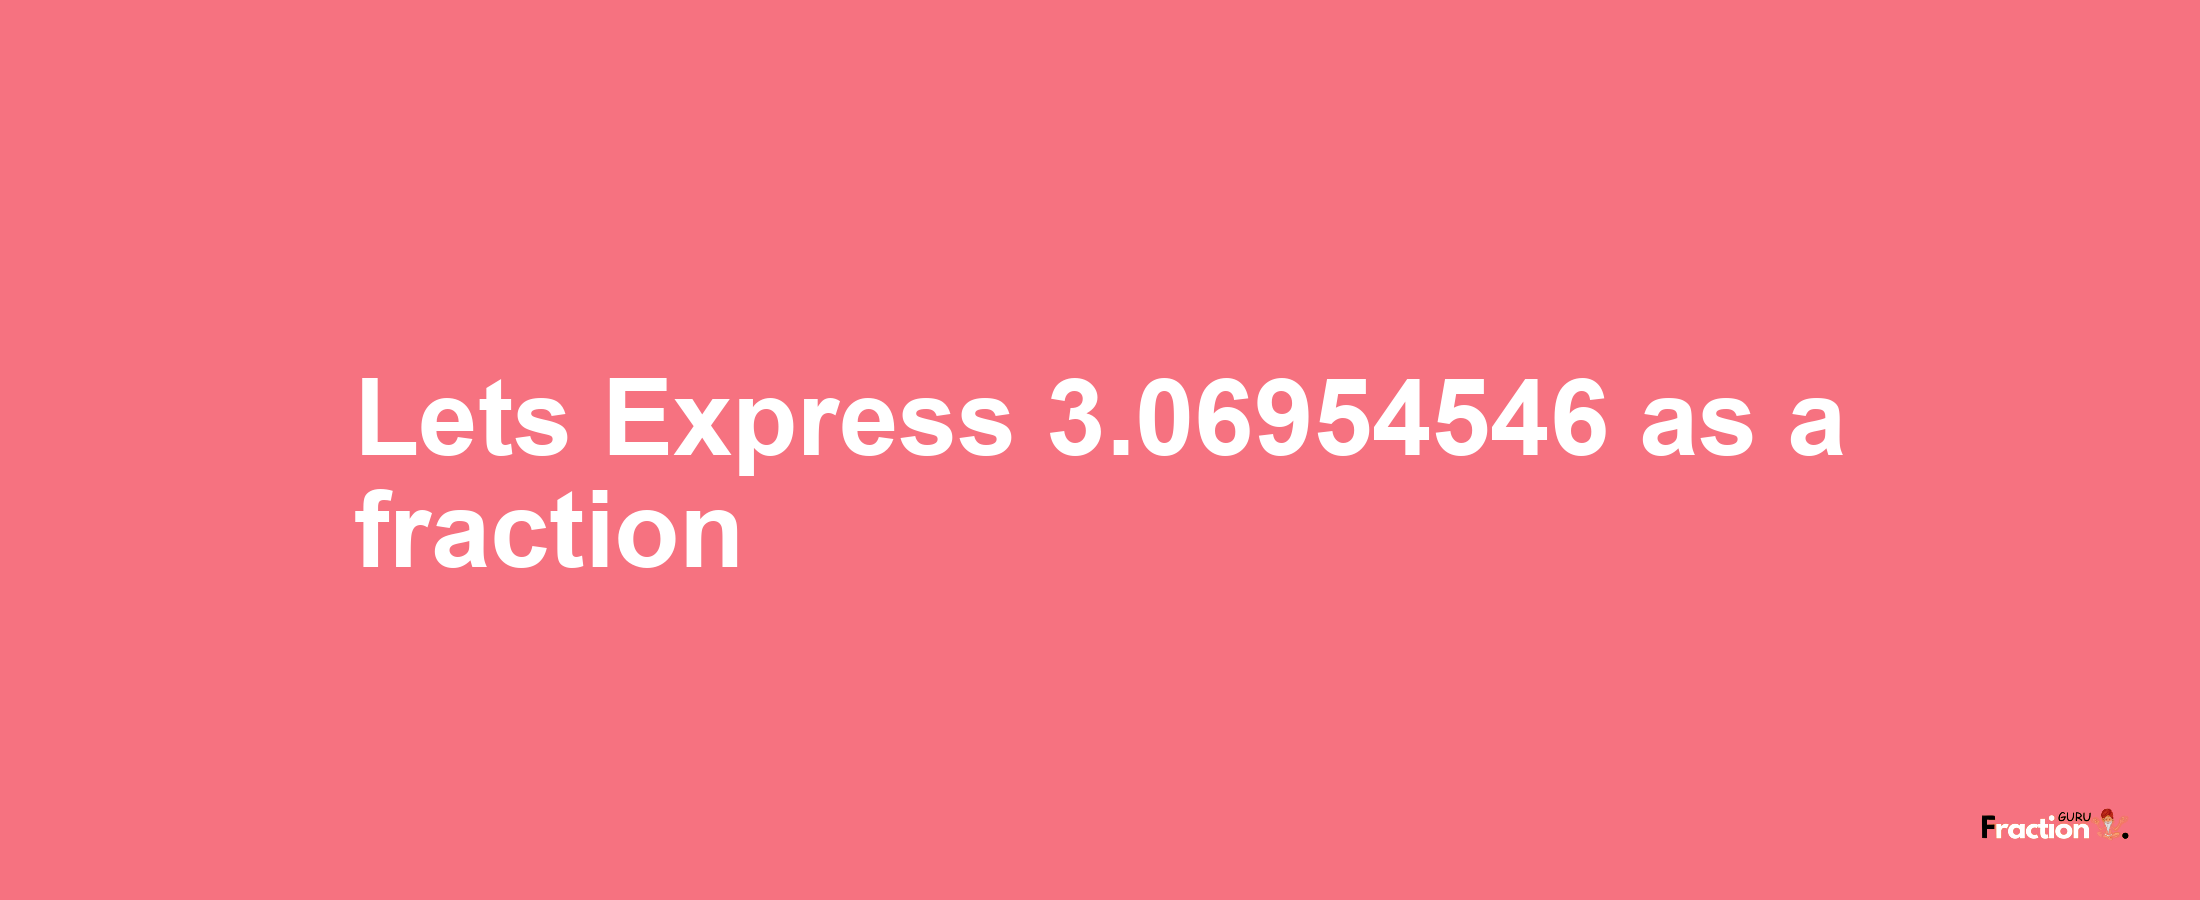 Lets Express 3.06954546 as afraction